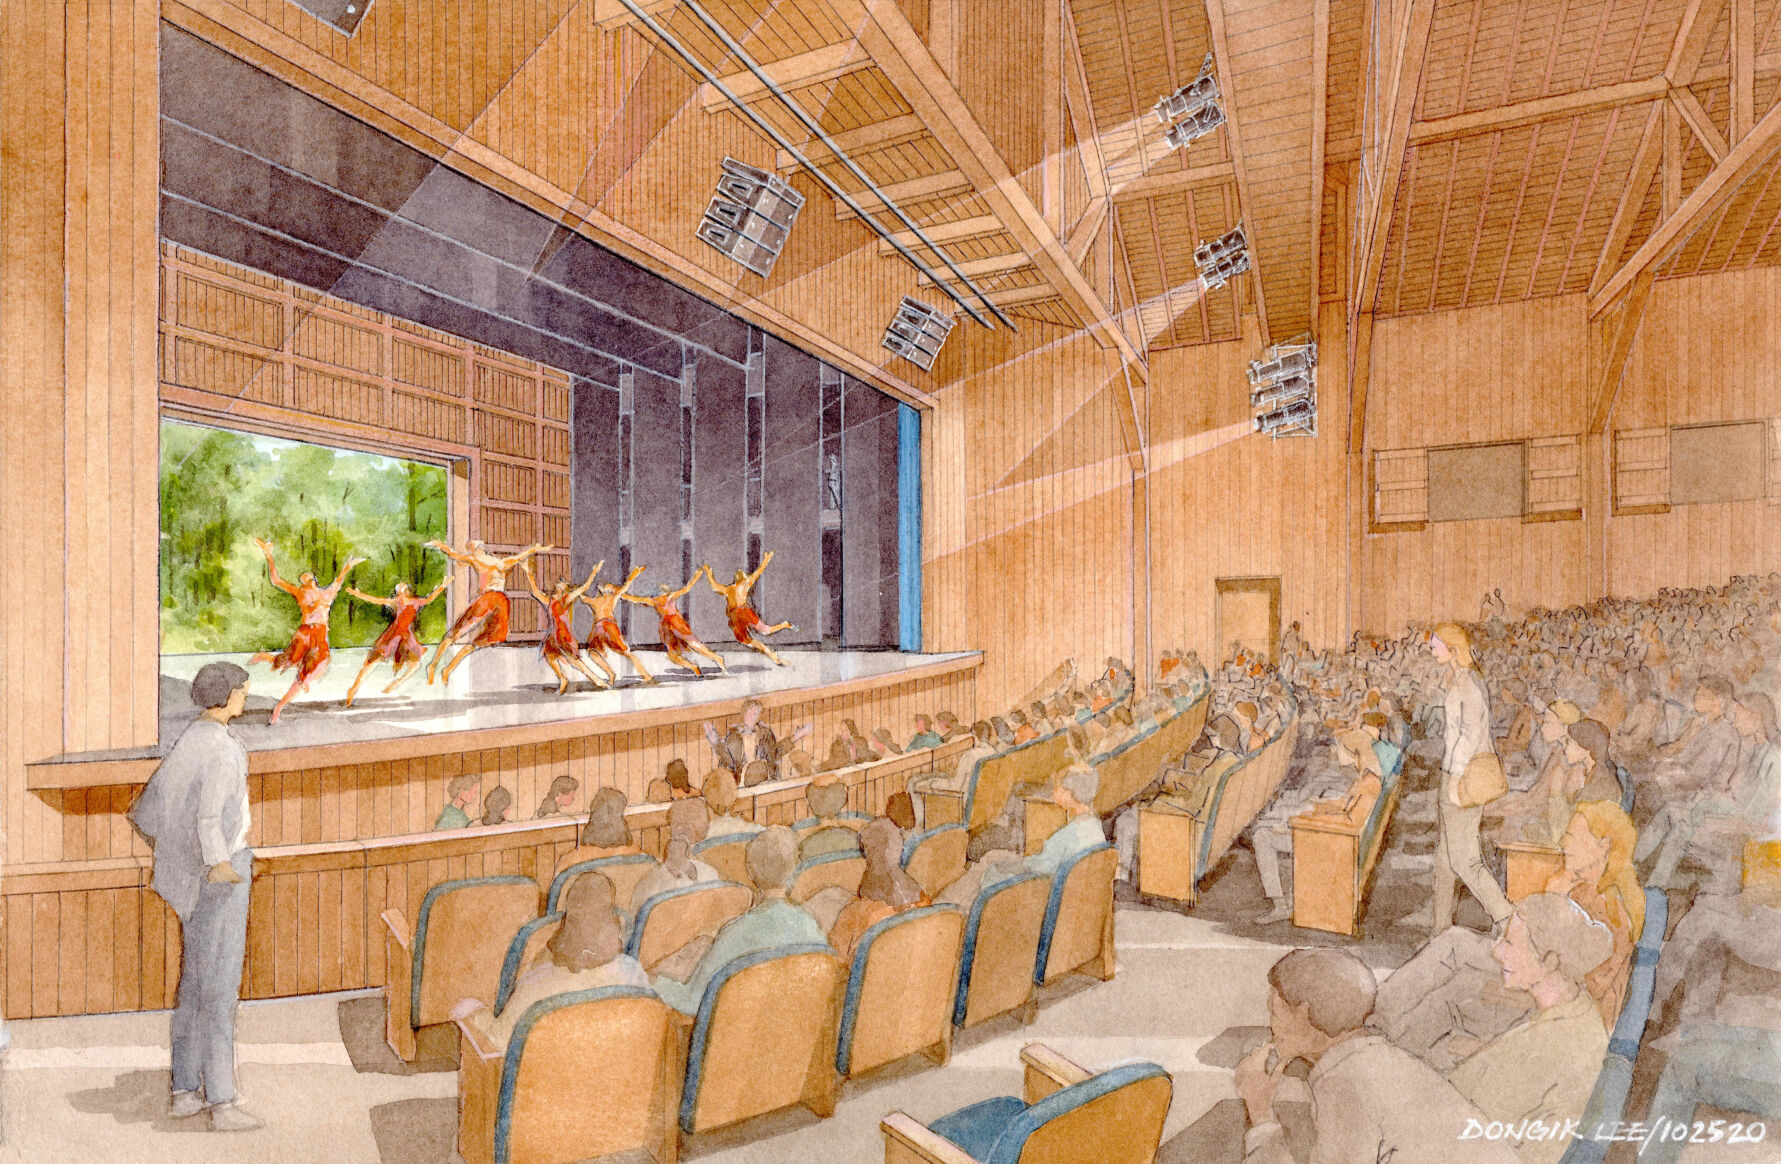 Jacob's Pillow announces reopening of Ted Shawn Theatre just in